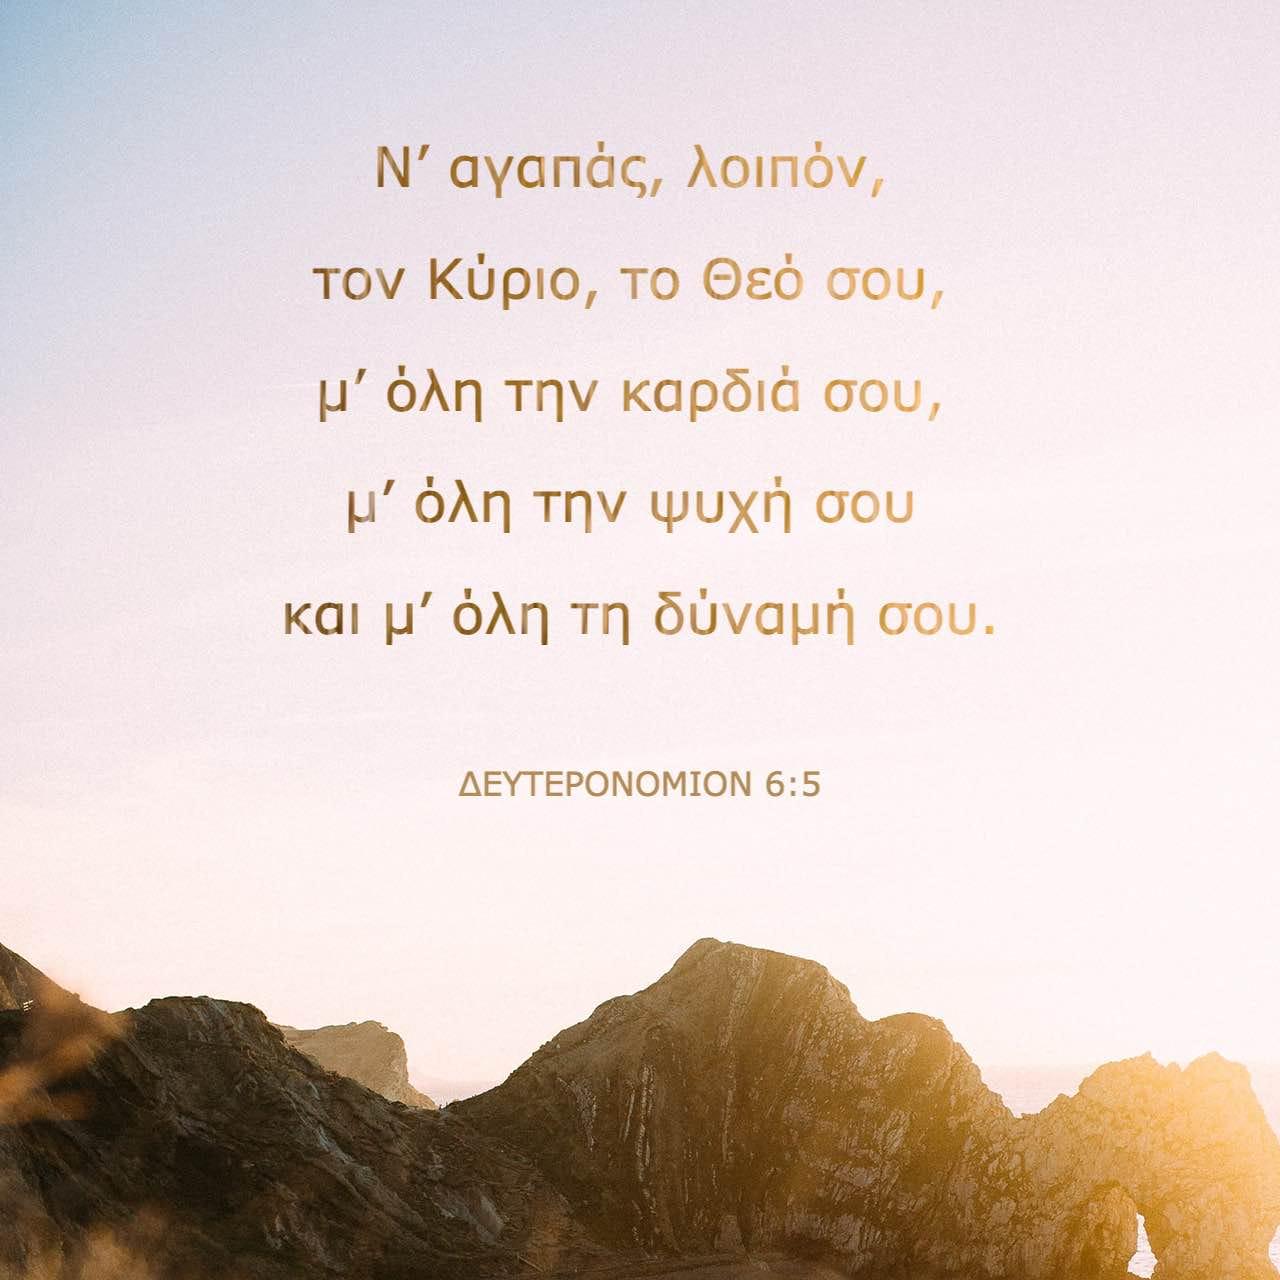 Bible Verse of the Day - day 80 - image 14190 (ΔΕΥΤΕΡΟΝΟΜΙΟΝ 6:4-9)